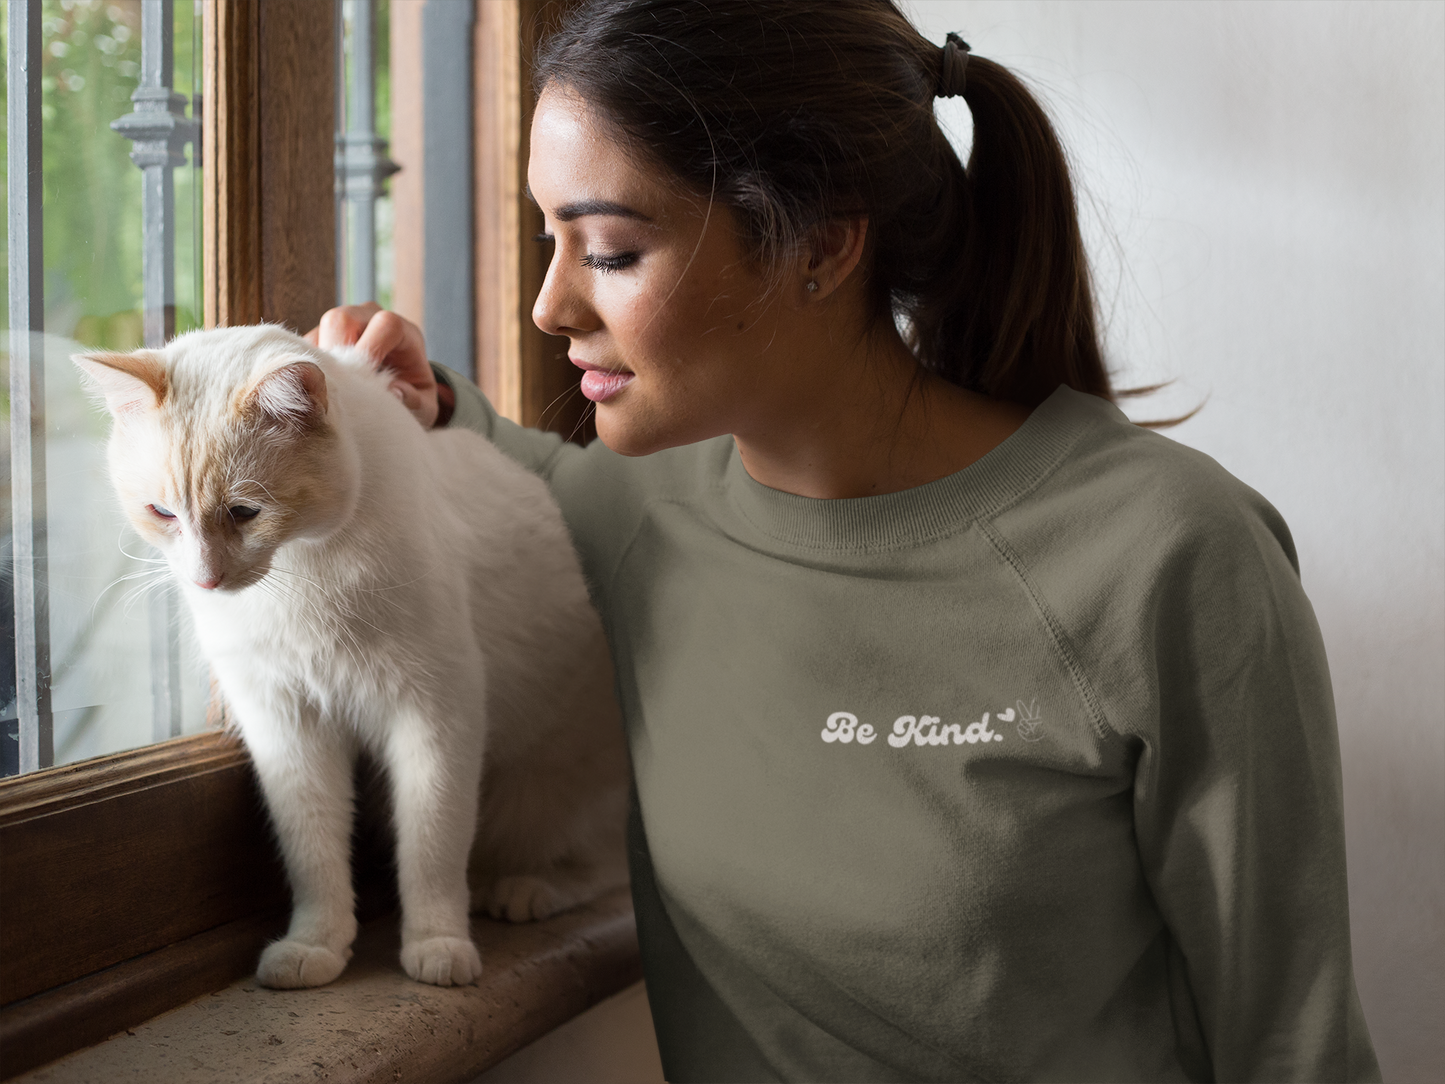 Be Kind Crew New Sweatshirt White on Army Green